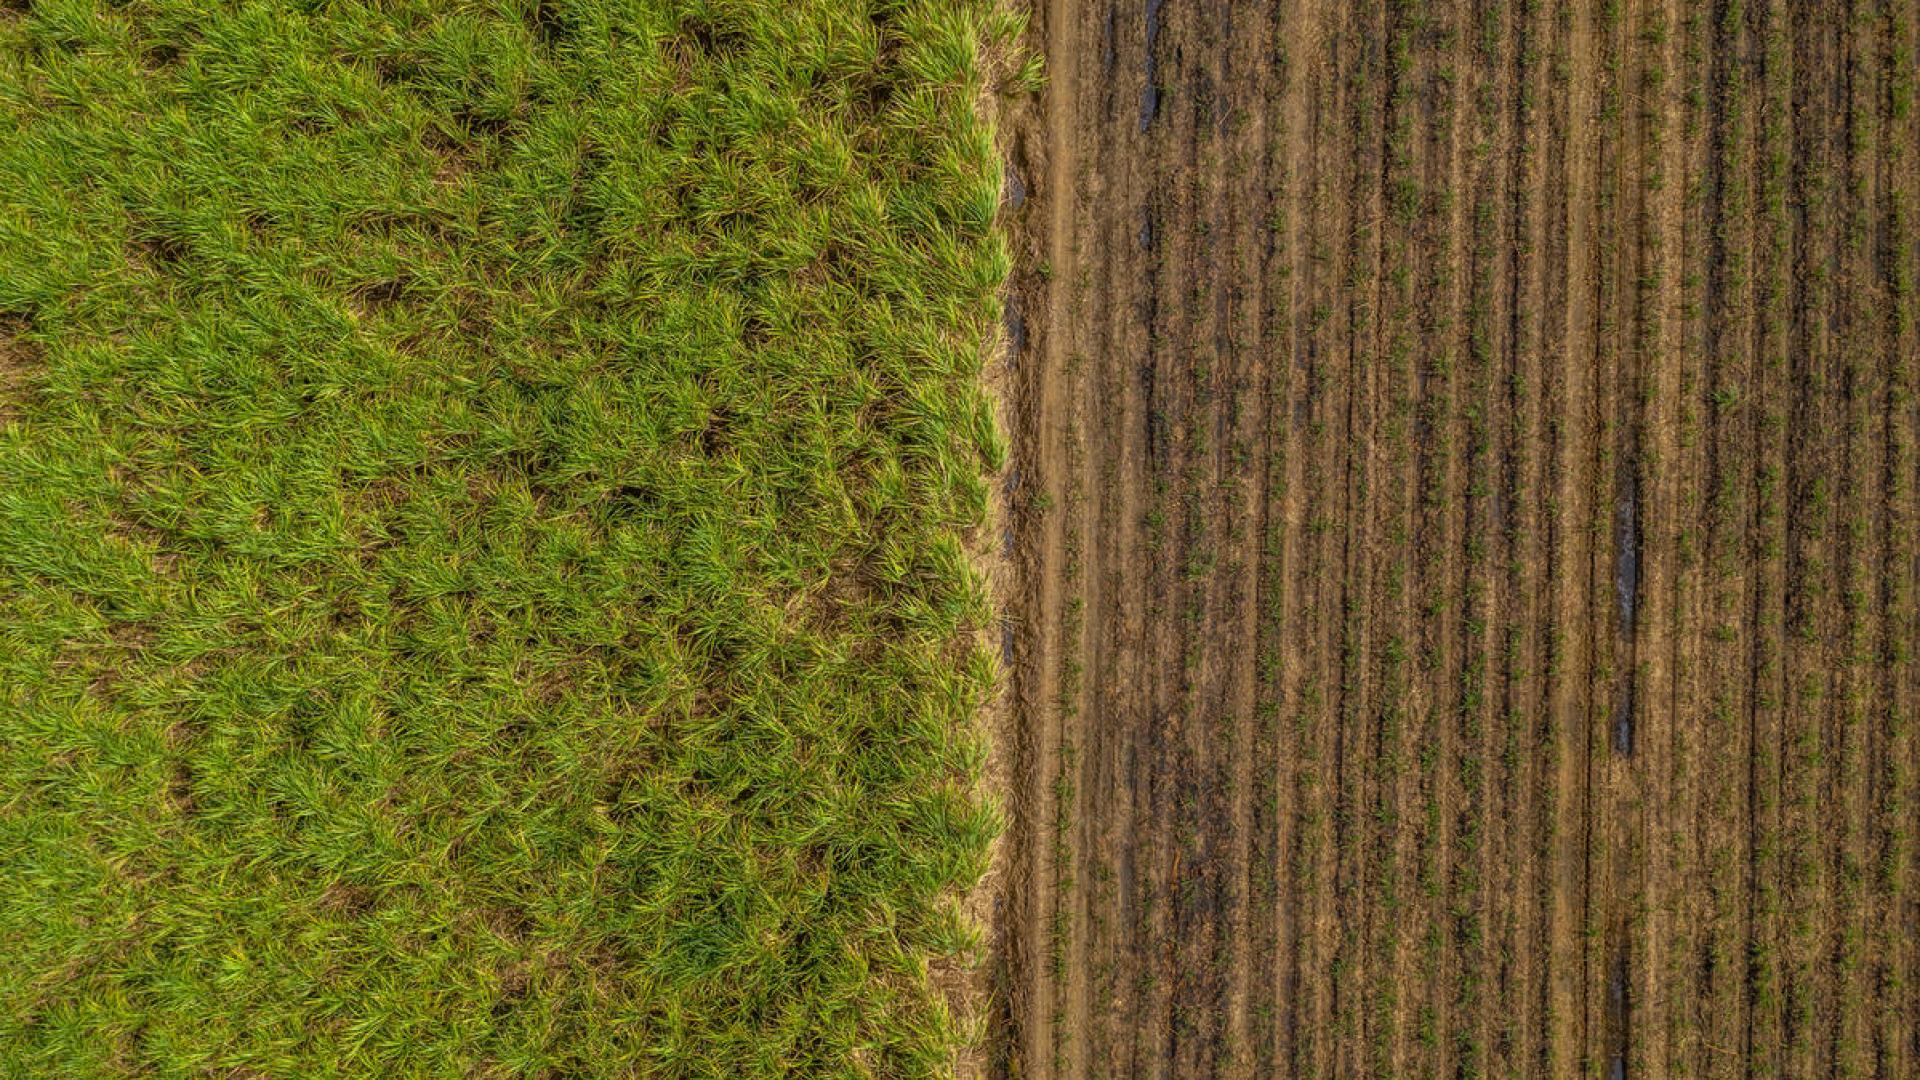 Aerial view of sugar cane in different stages of growth. Photo Credit © Tom Vierus / WWF-UK